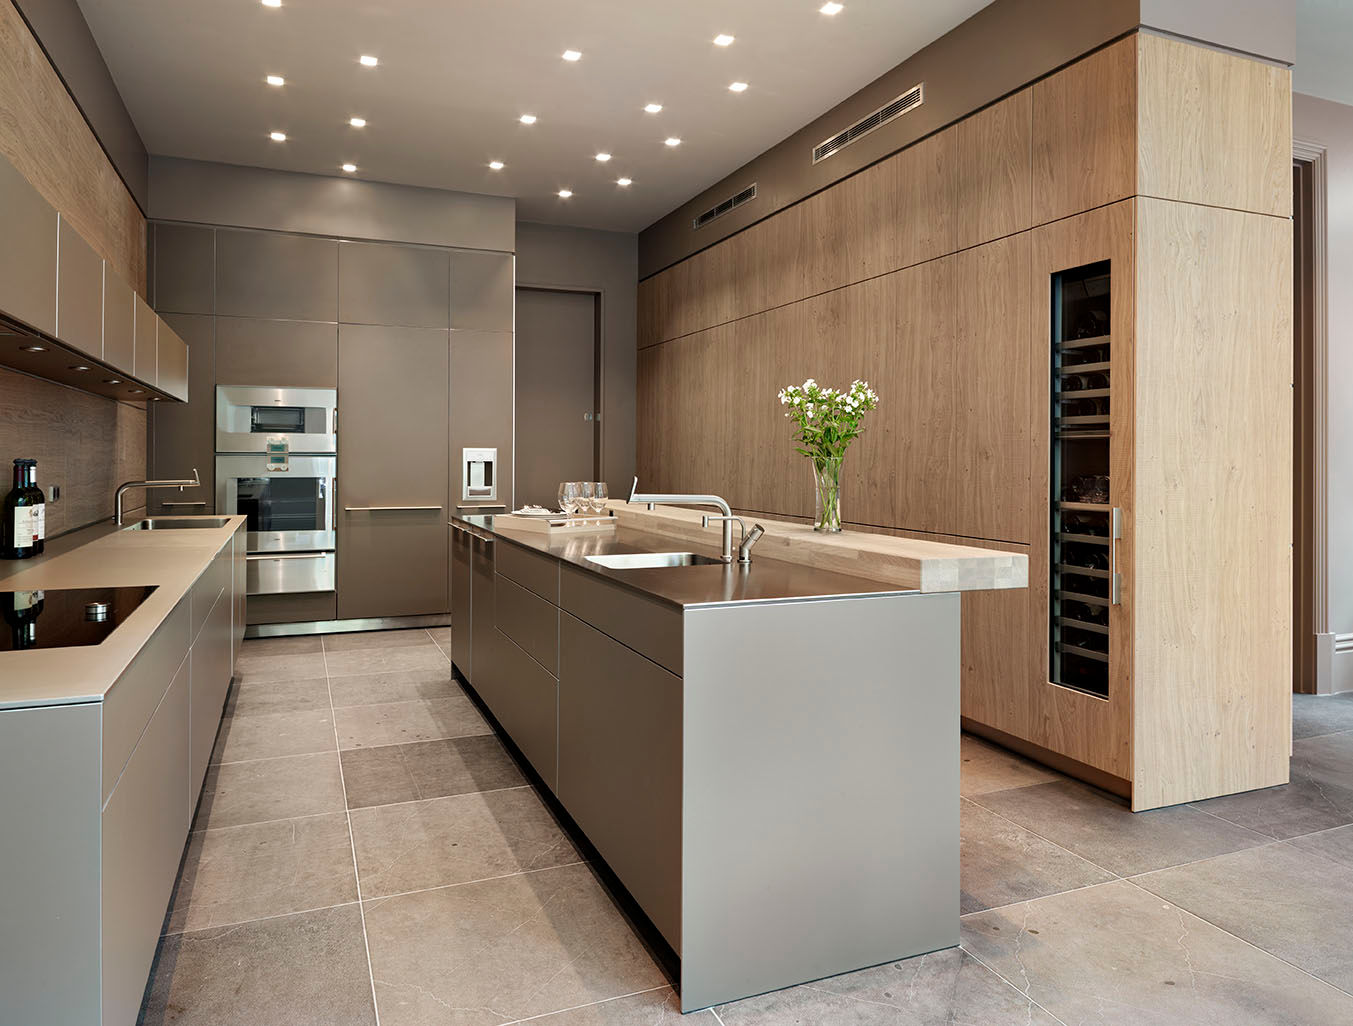 Grand dining Kitchen Architecture Dapur Modern kitchen architecture,bulthaup,bulthaup b3,bespoke kitchen,contemporary kitchen,kitchen island,breakfast bar,integrated kitchen,integrated appliance,wine cooler,gagganau,sociable living